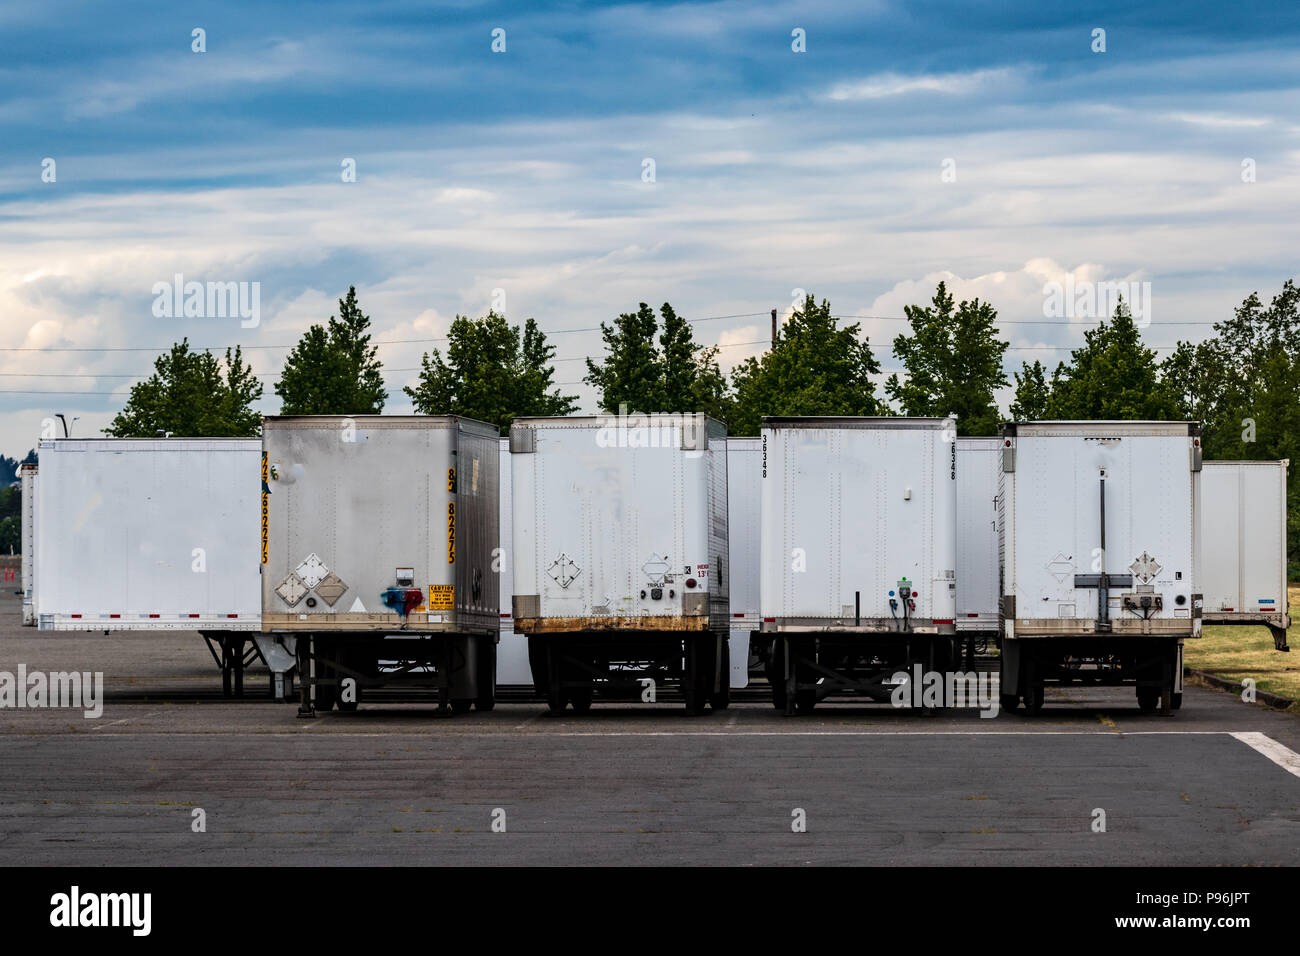 Semi tractor trailers parked in a row with doors closed under a blue cloudy sky with trees Stock Photo